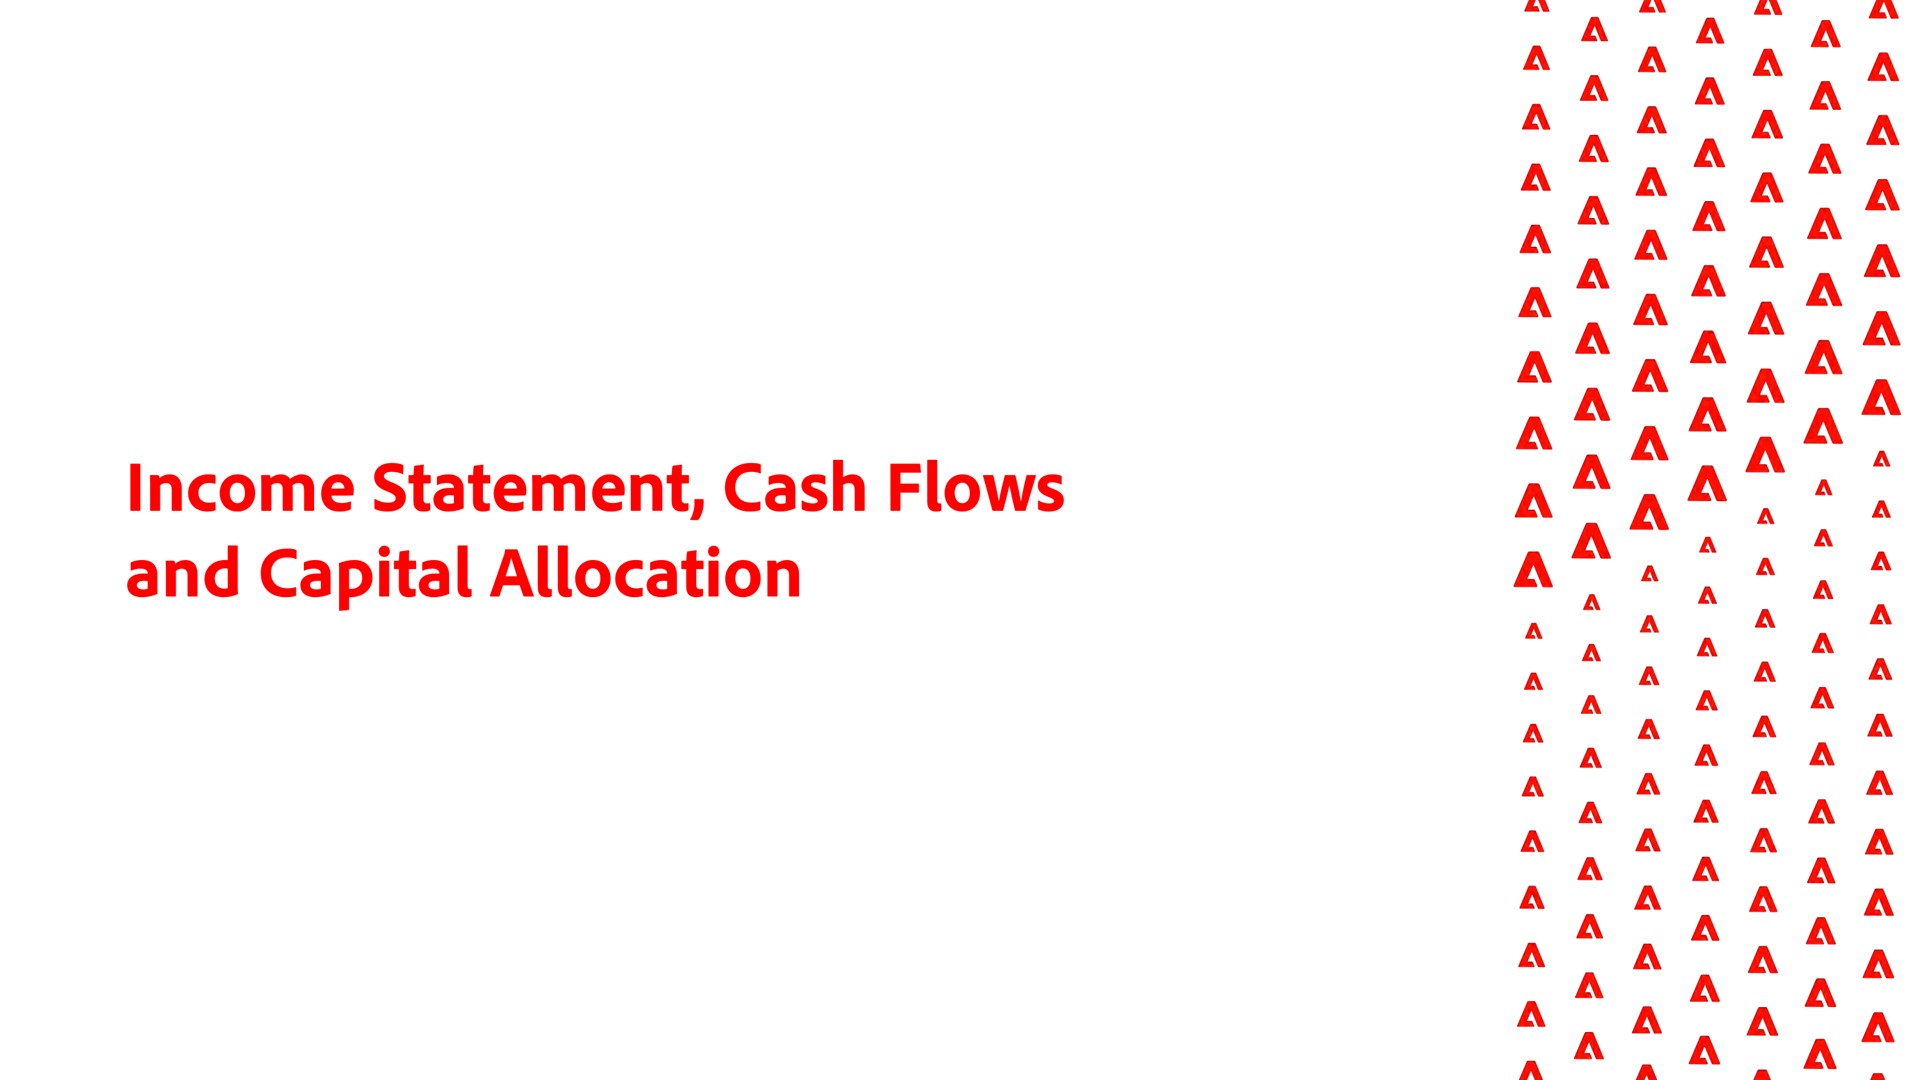 income statement cash flows and capital allocation | Adobe